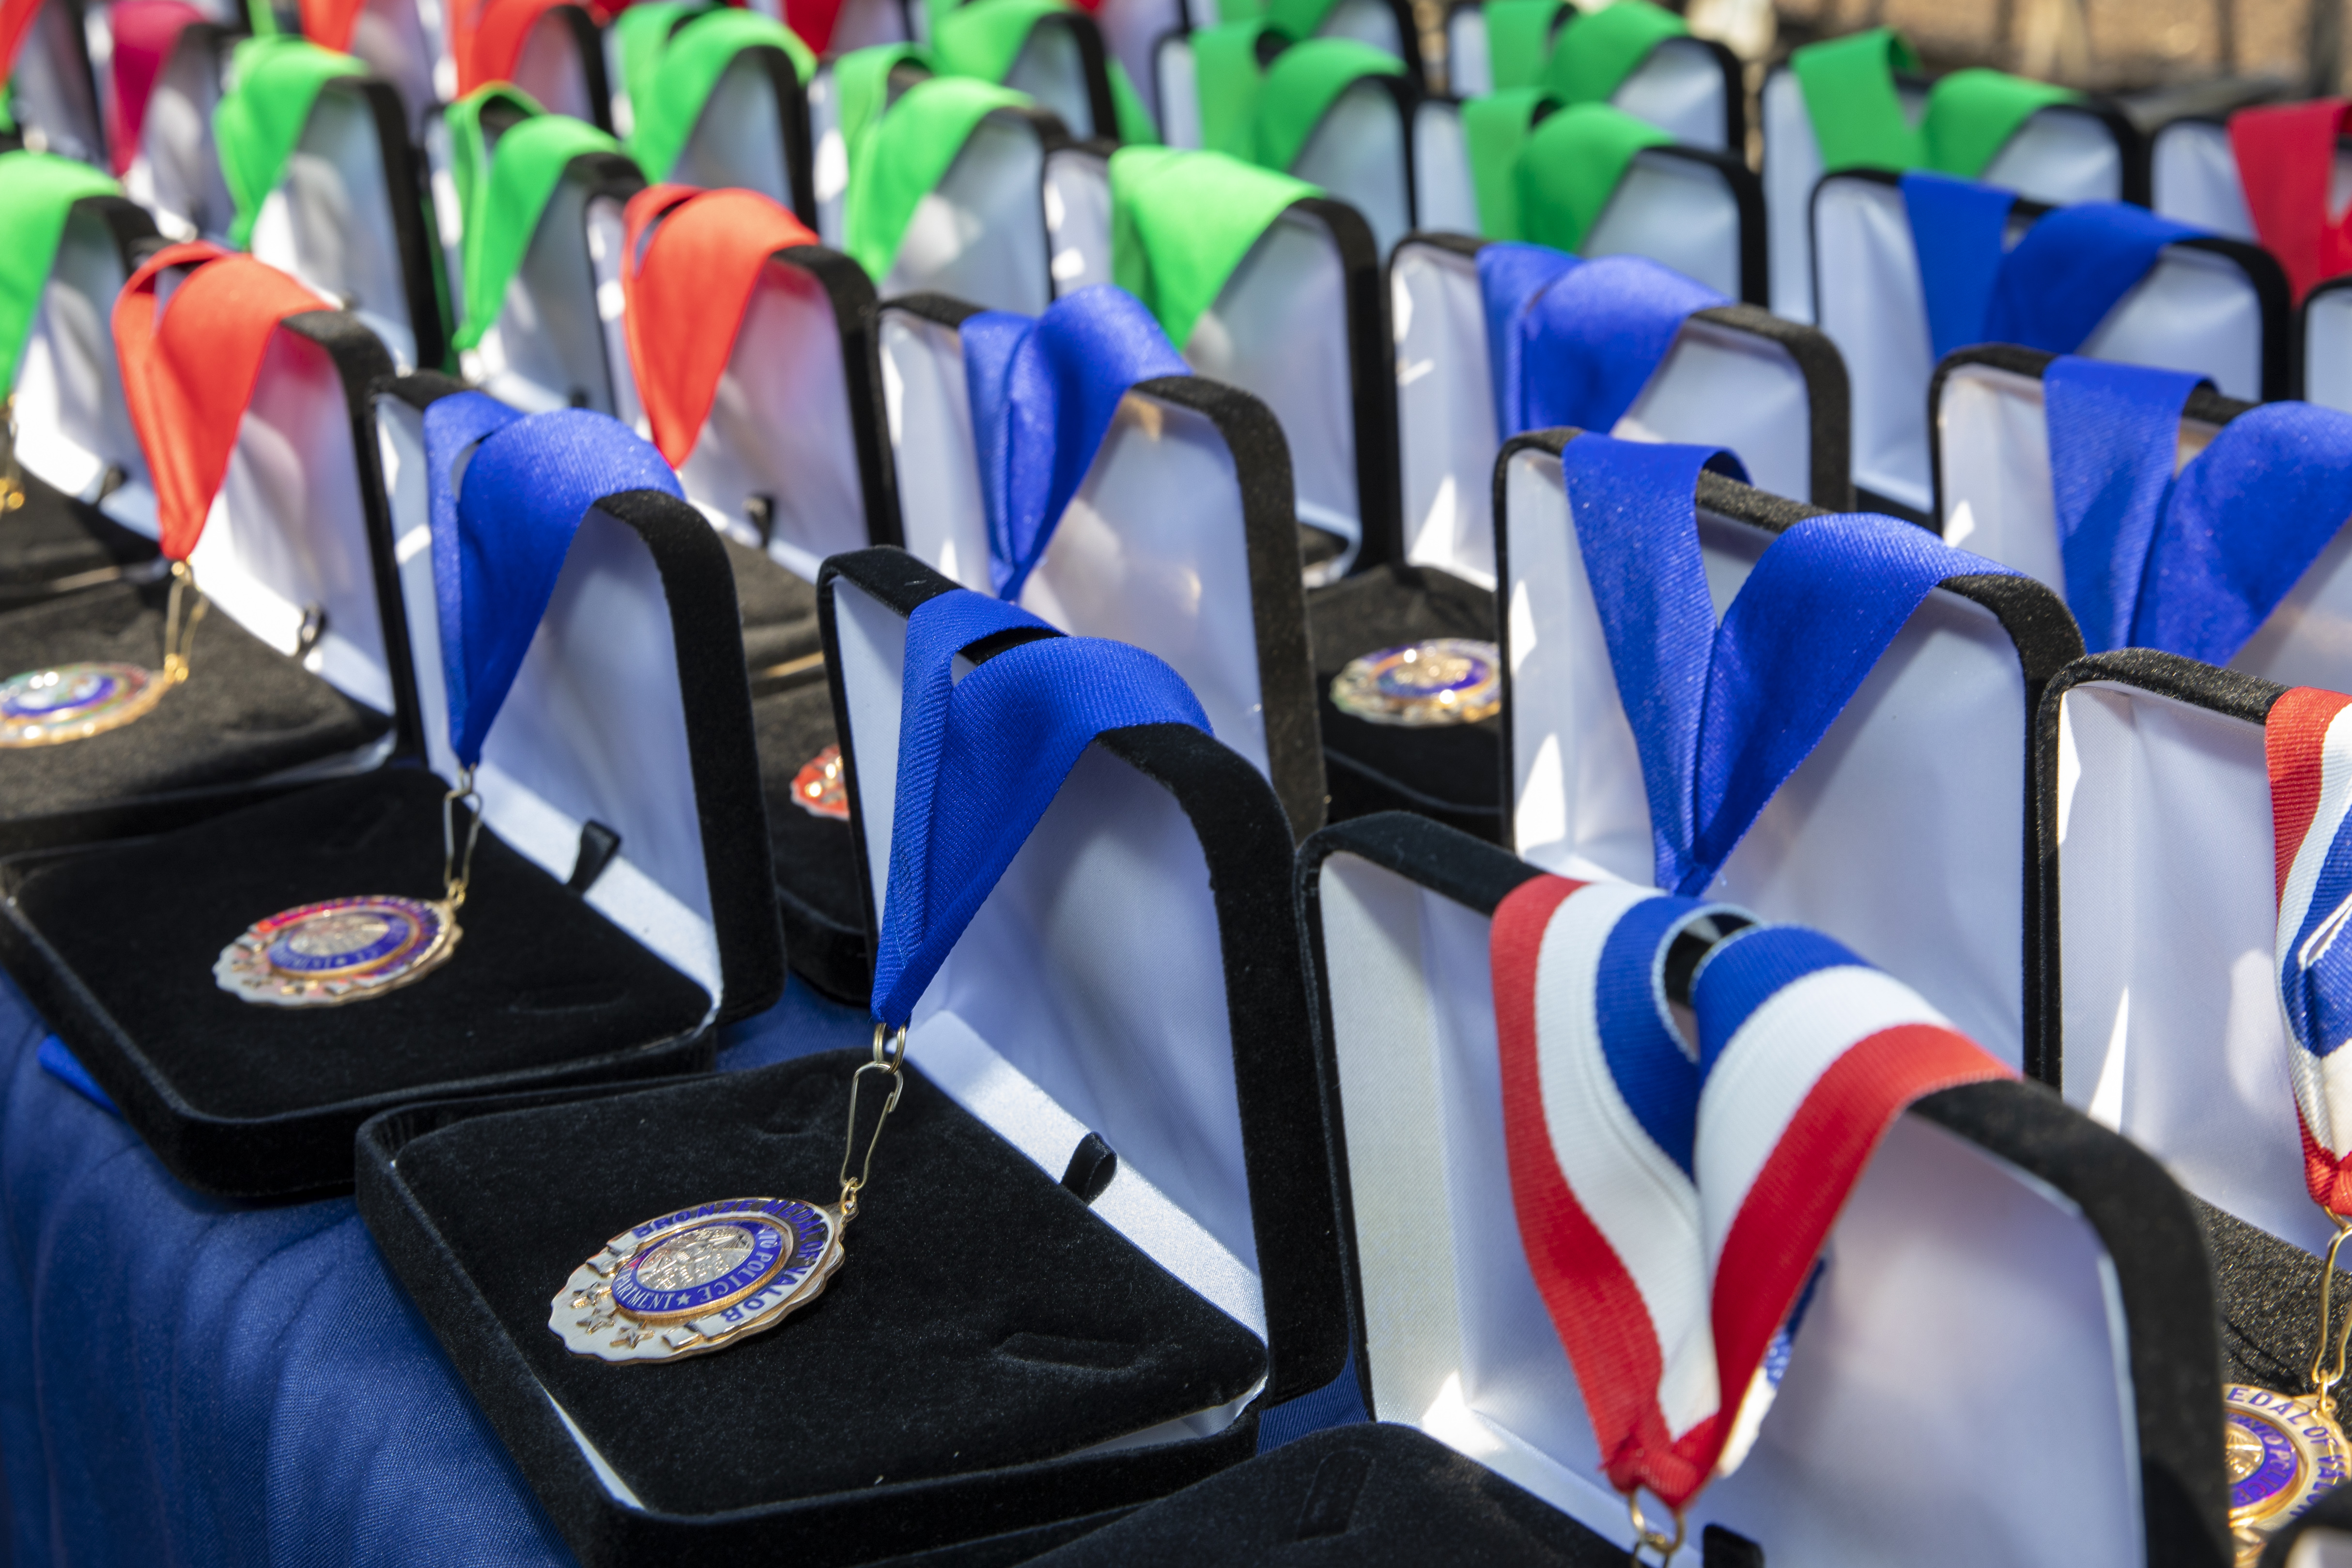 Photo of commendation award medals with ribbons in boxes on a table